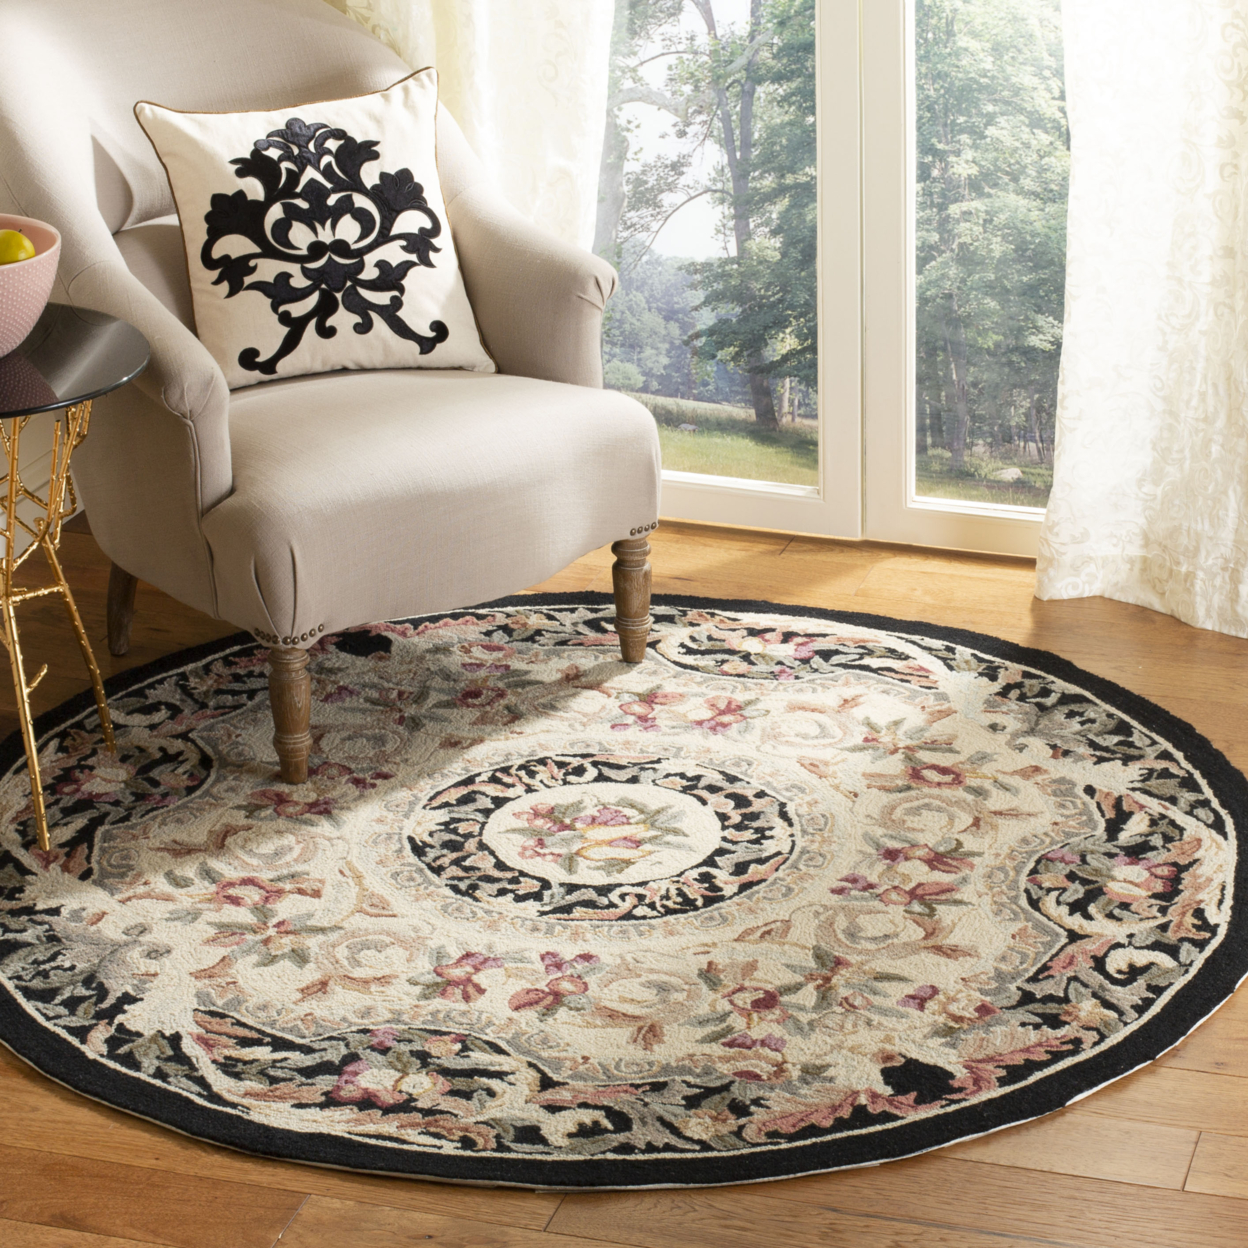 SAFAVIEH Chelsea Collection HK80A Hand-hooked Black Rug - 5' 6 Round